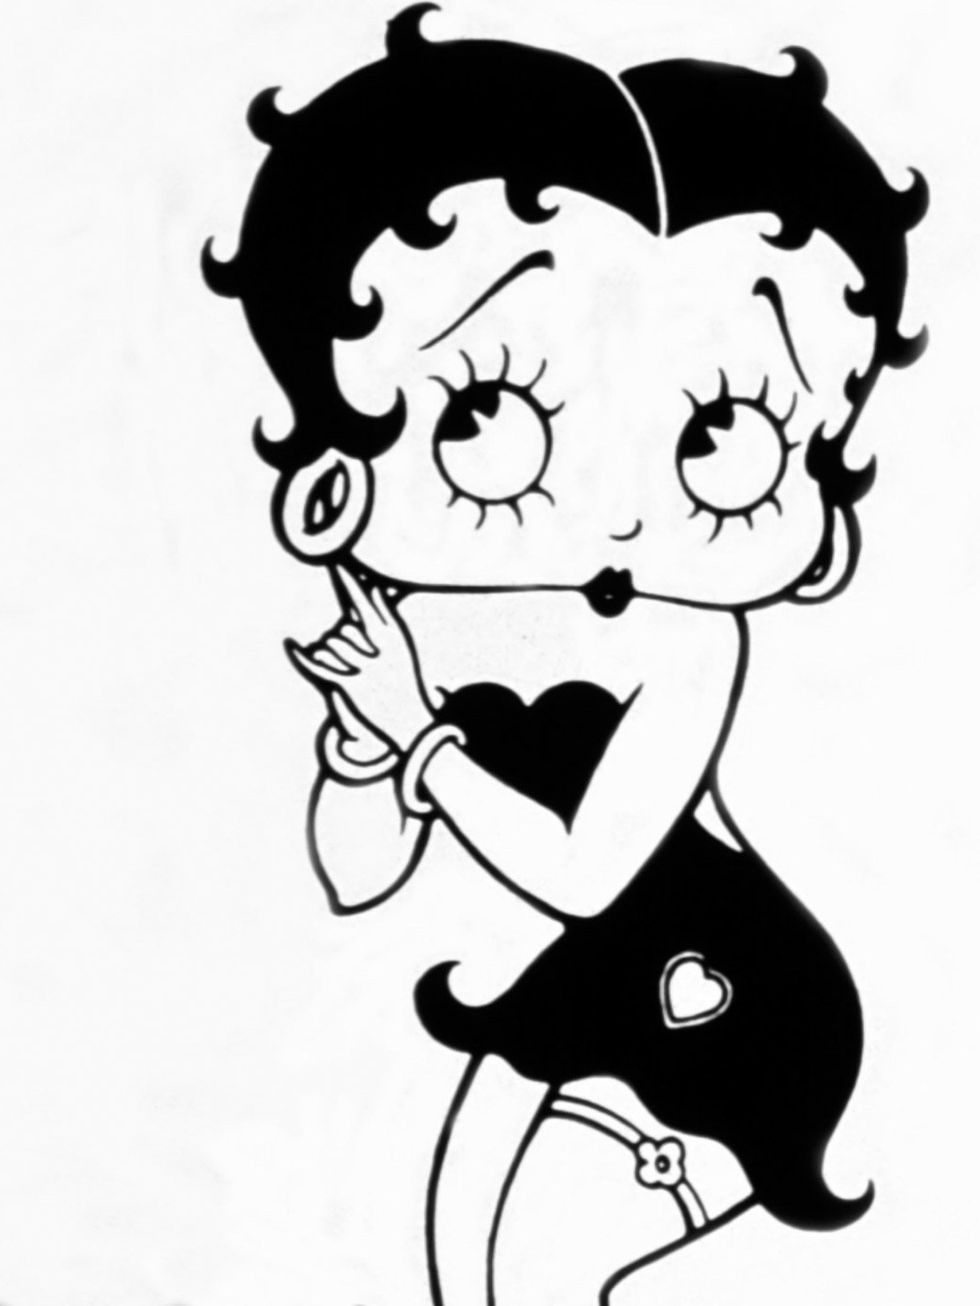 <p><strong>Betty Boop</strong></p><p>Her kiss curls, sweetheart neckline dress and big watery eyes put her in the league of a silent movie star. Breaking ground in the 1930s as the first sexualised female cartoon character, her style and independent spiri